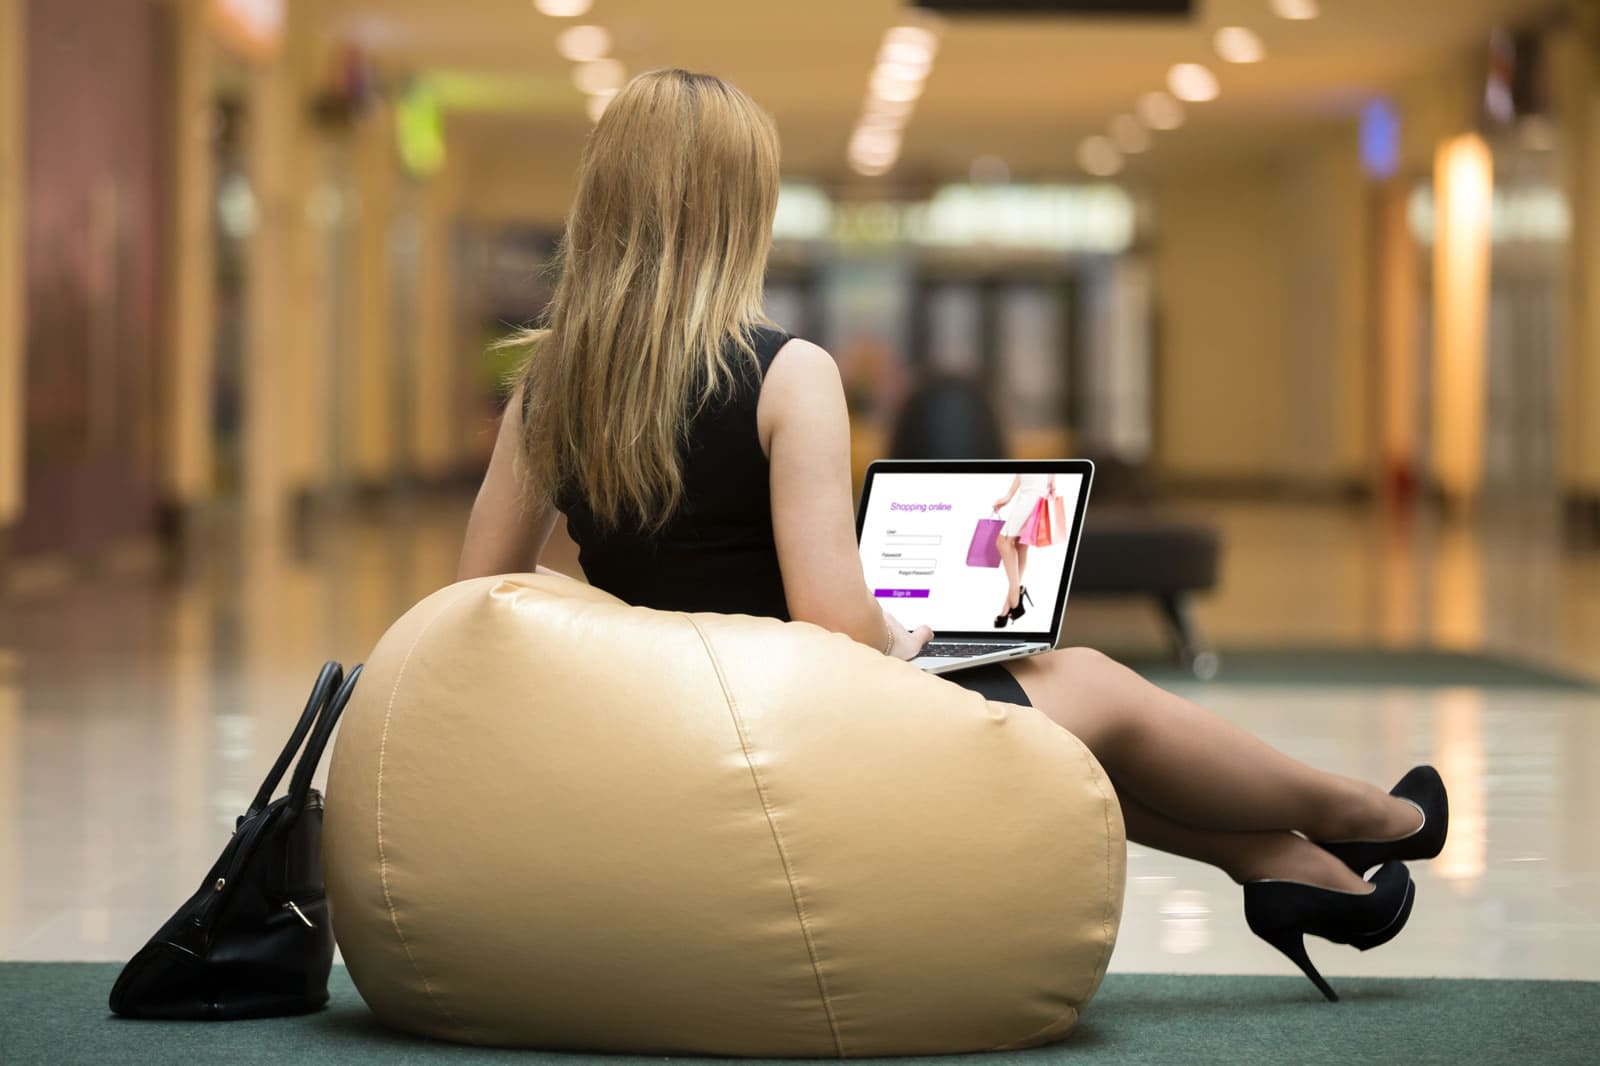 Smartly dressed young woman shopping for fashion items online while seating in an indoor mall